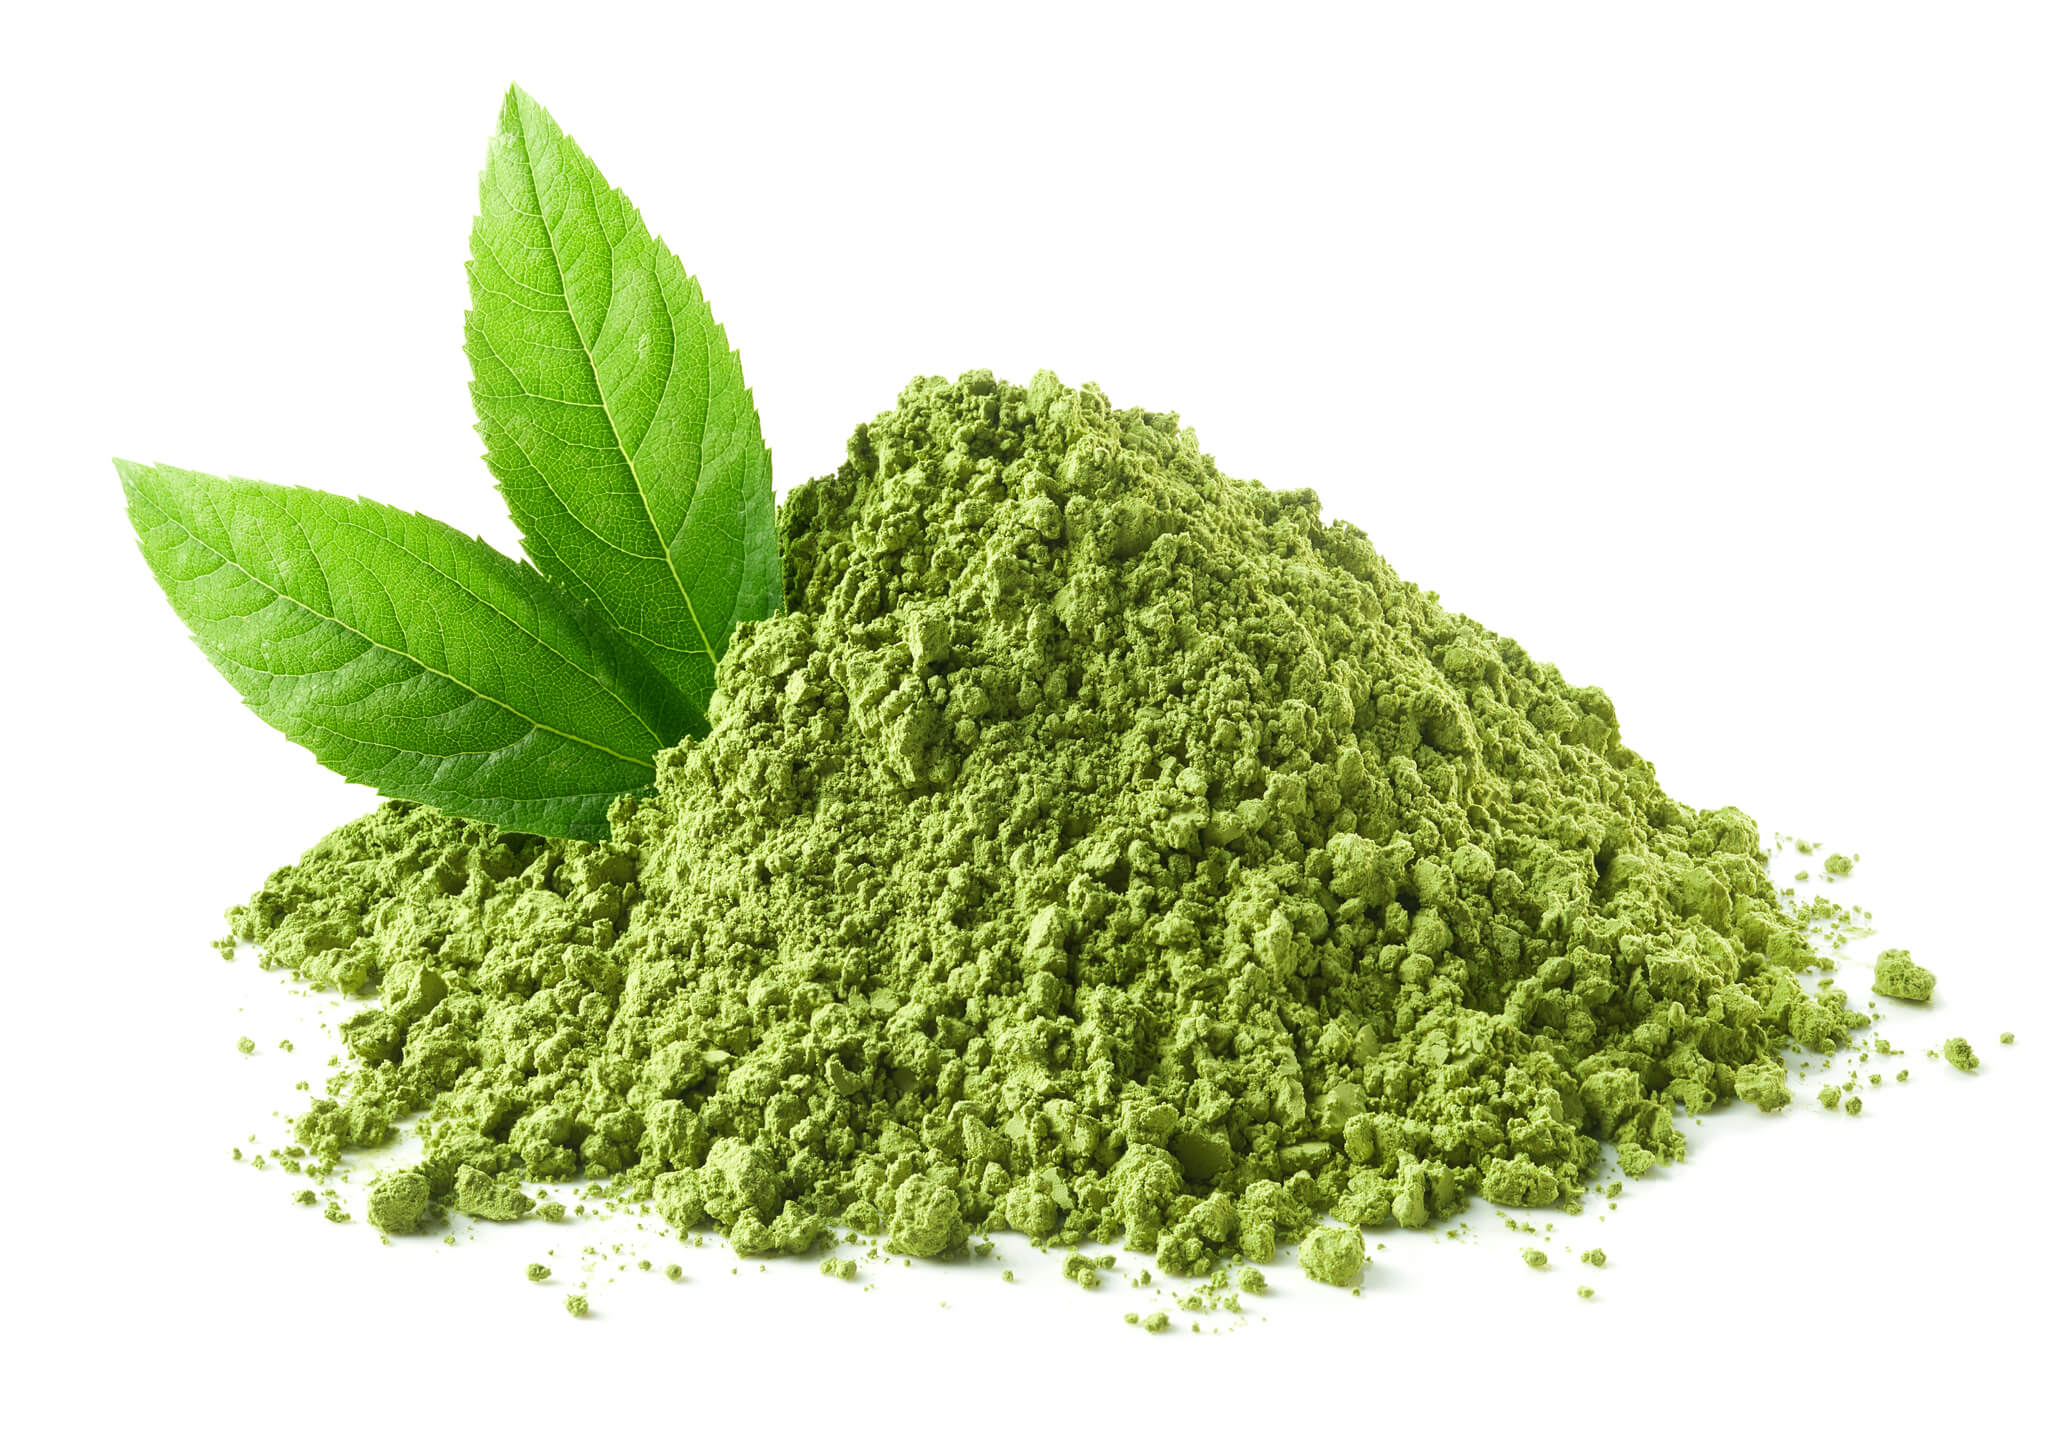 A pile of matcha made from green tea with two green tea leaves sticking out of the left side. This is set against a white background